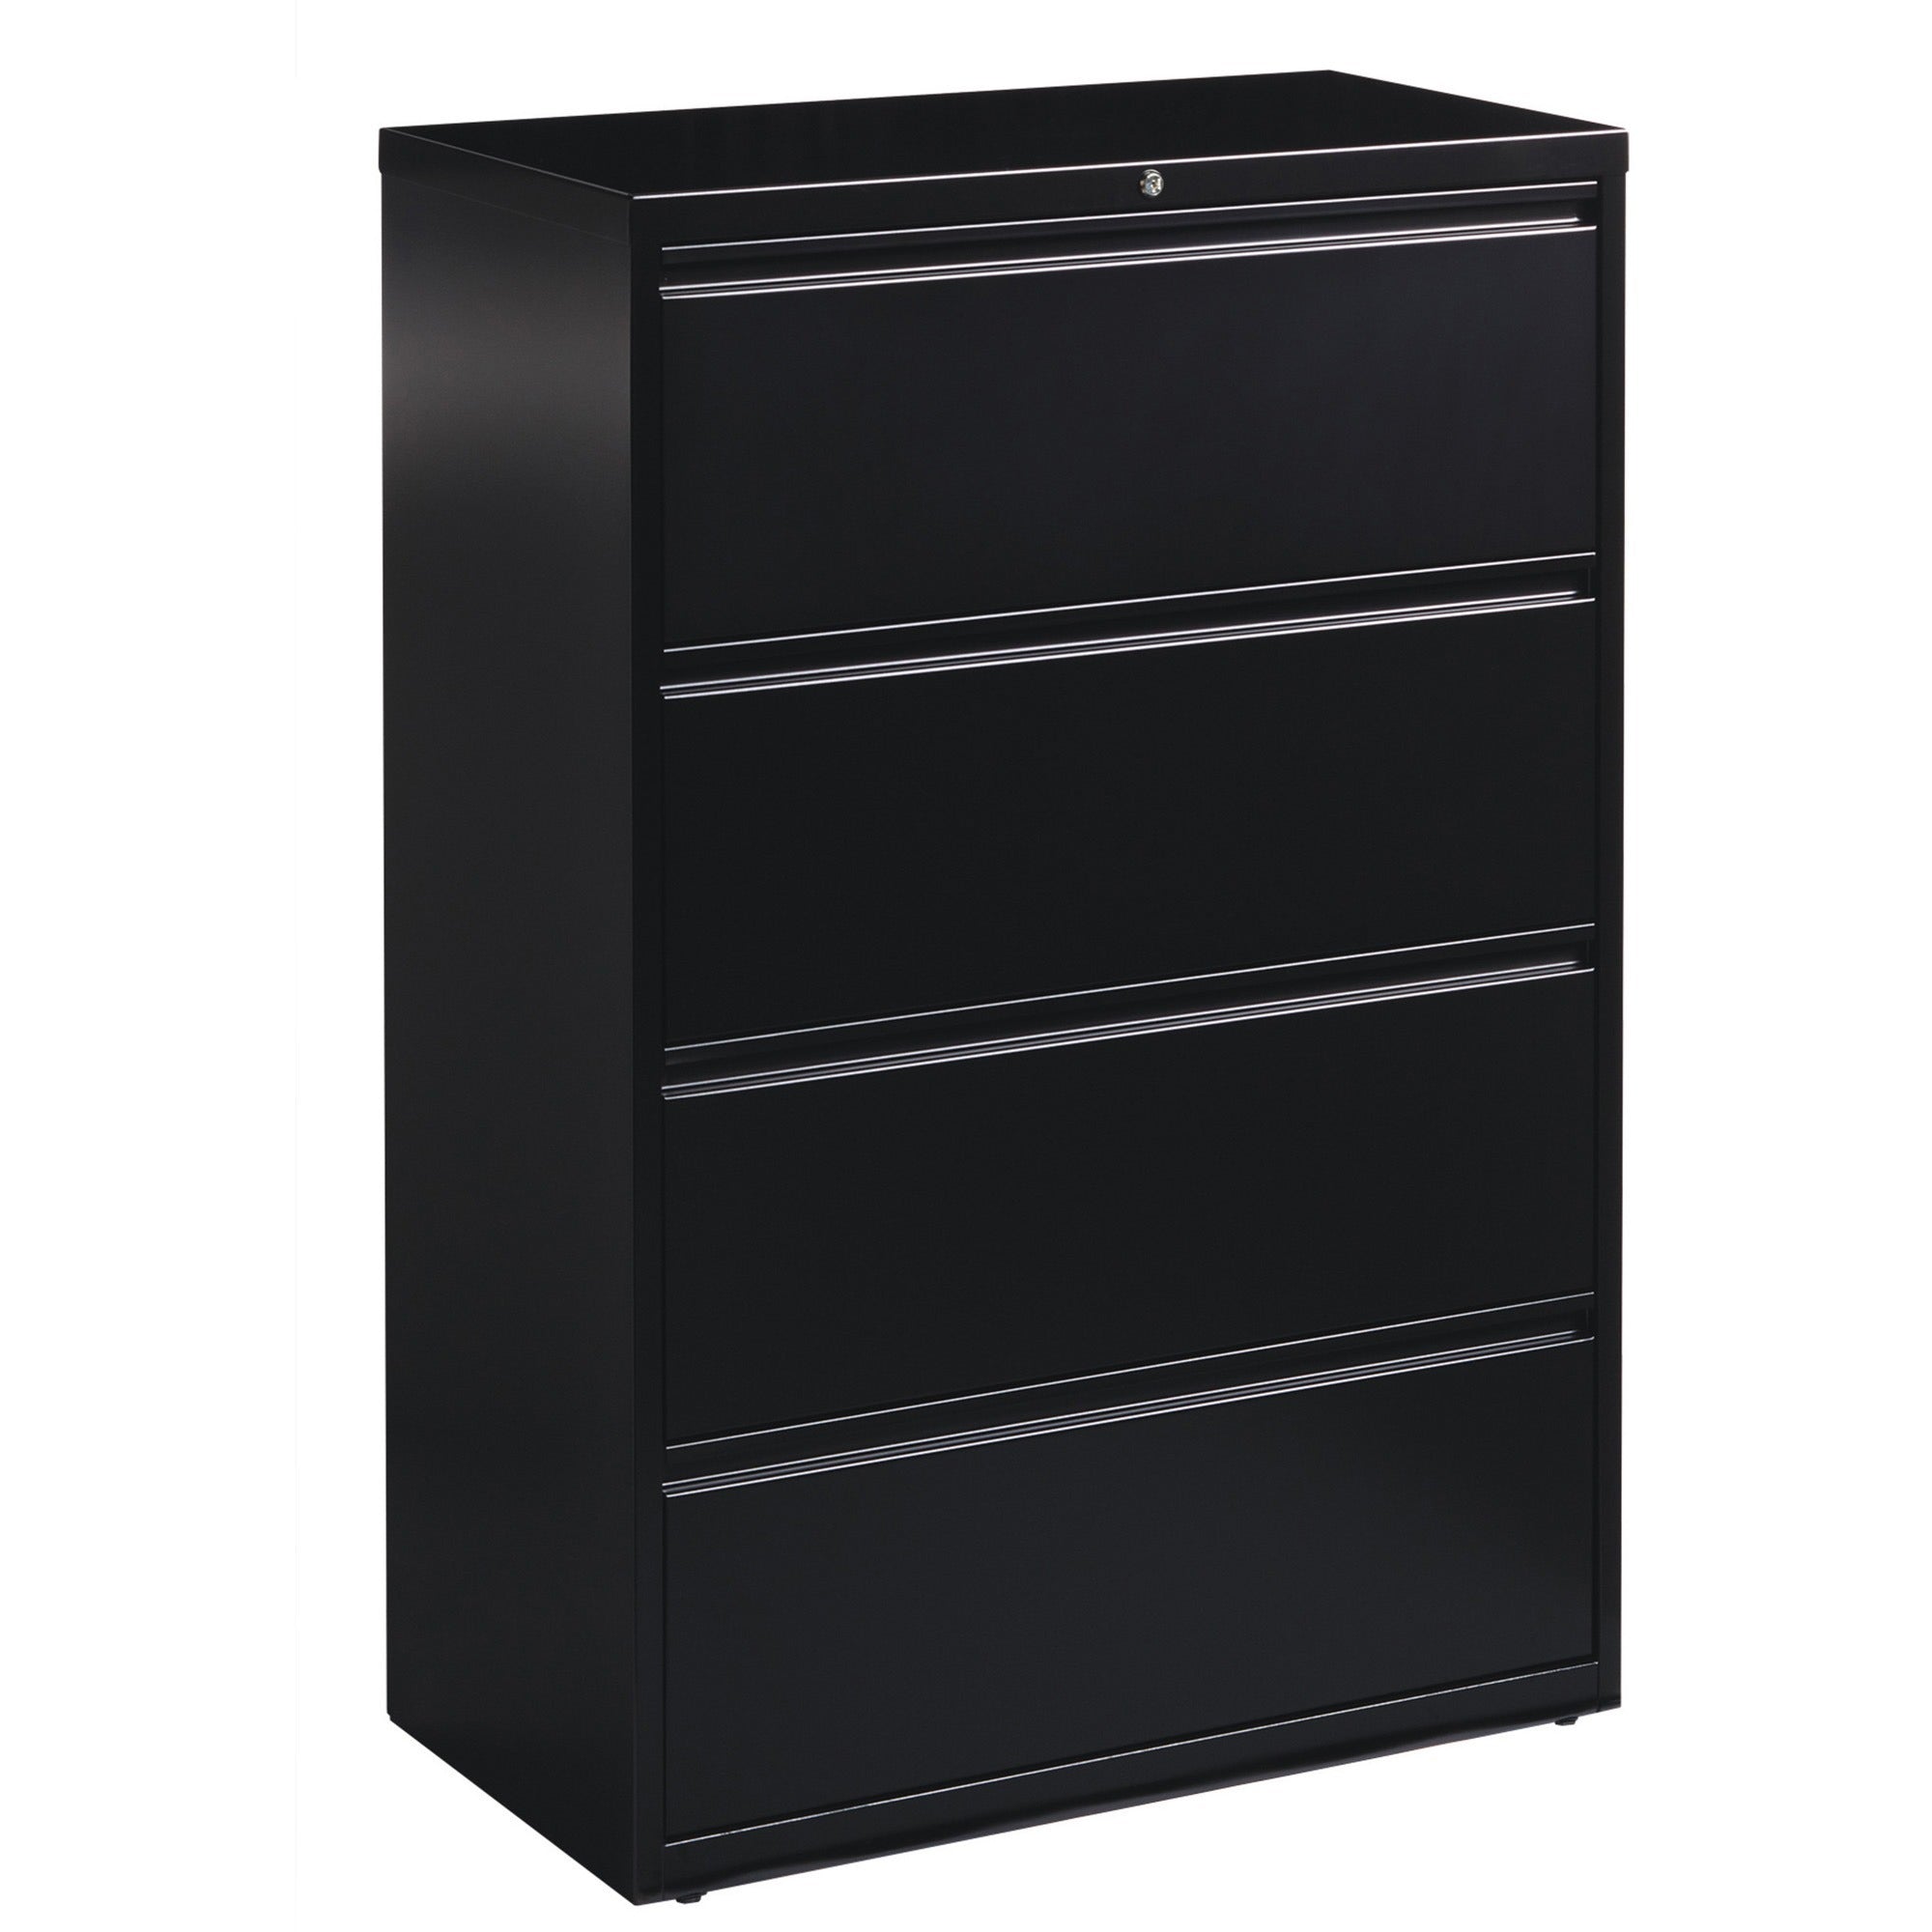 Lorell Fortress Series Lateral File - 36" x 18.6" x 52.5" - 4 x Drawer(s) for File - Letter, Legal, A4 - Lateral - Ball-bearing Suspension, Leveling Glide, Label Holder, Interlocking - Black - Steel - Recycled - 